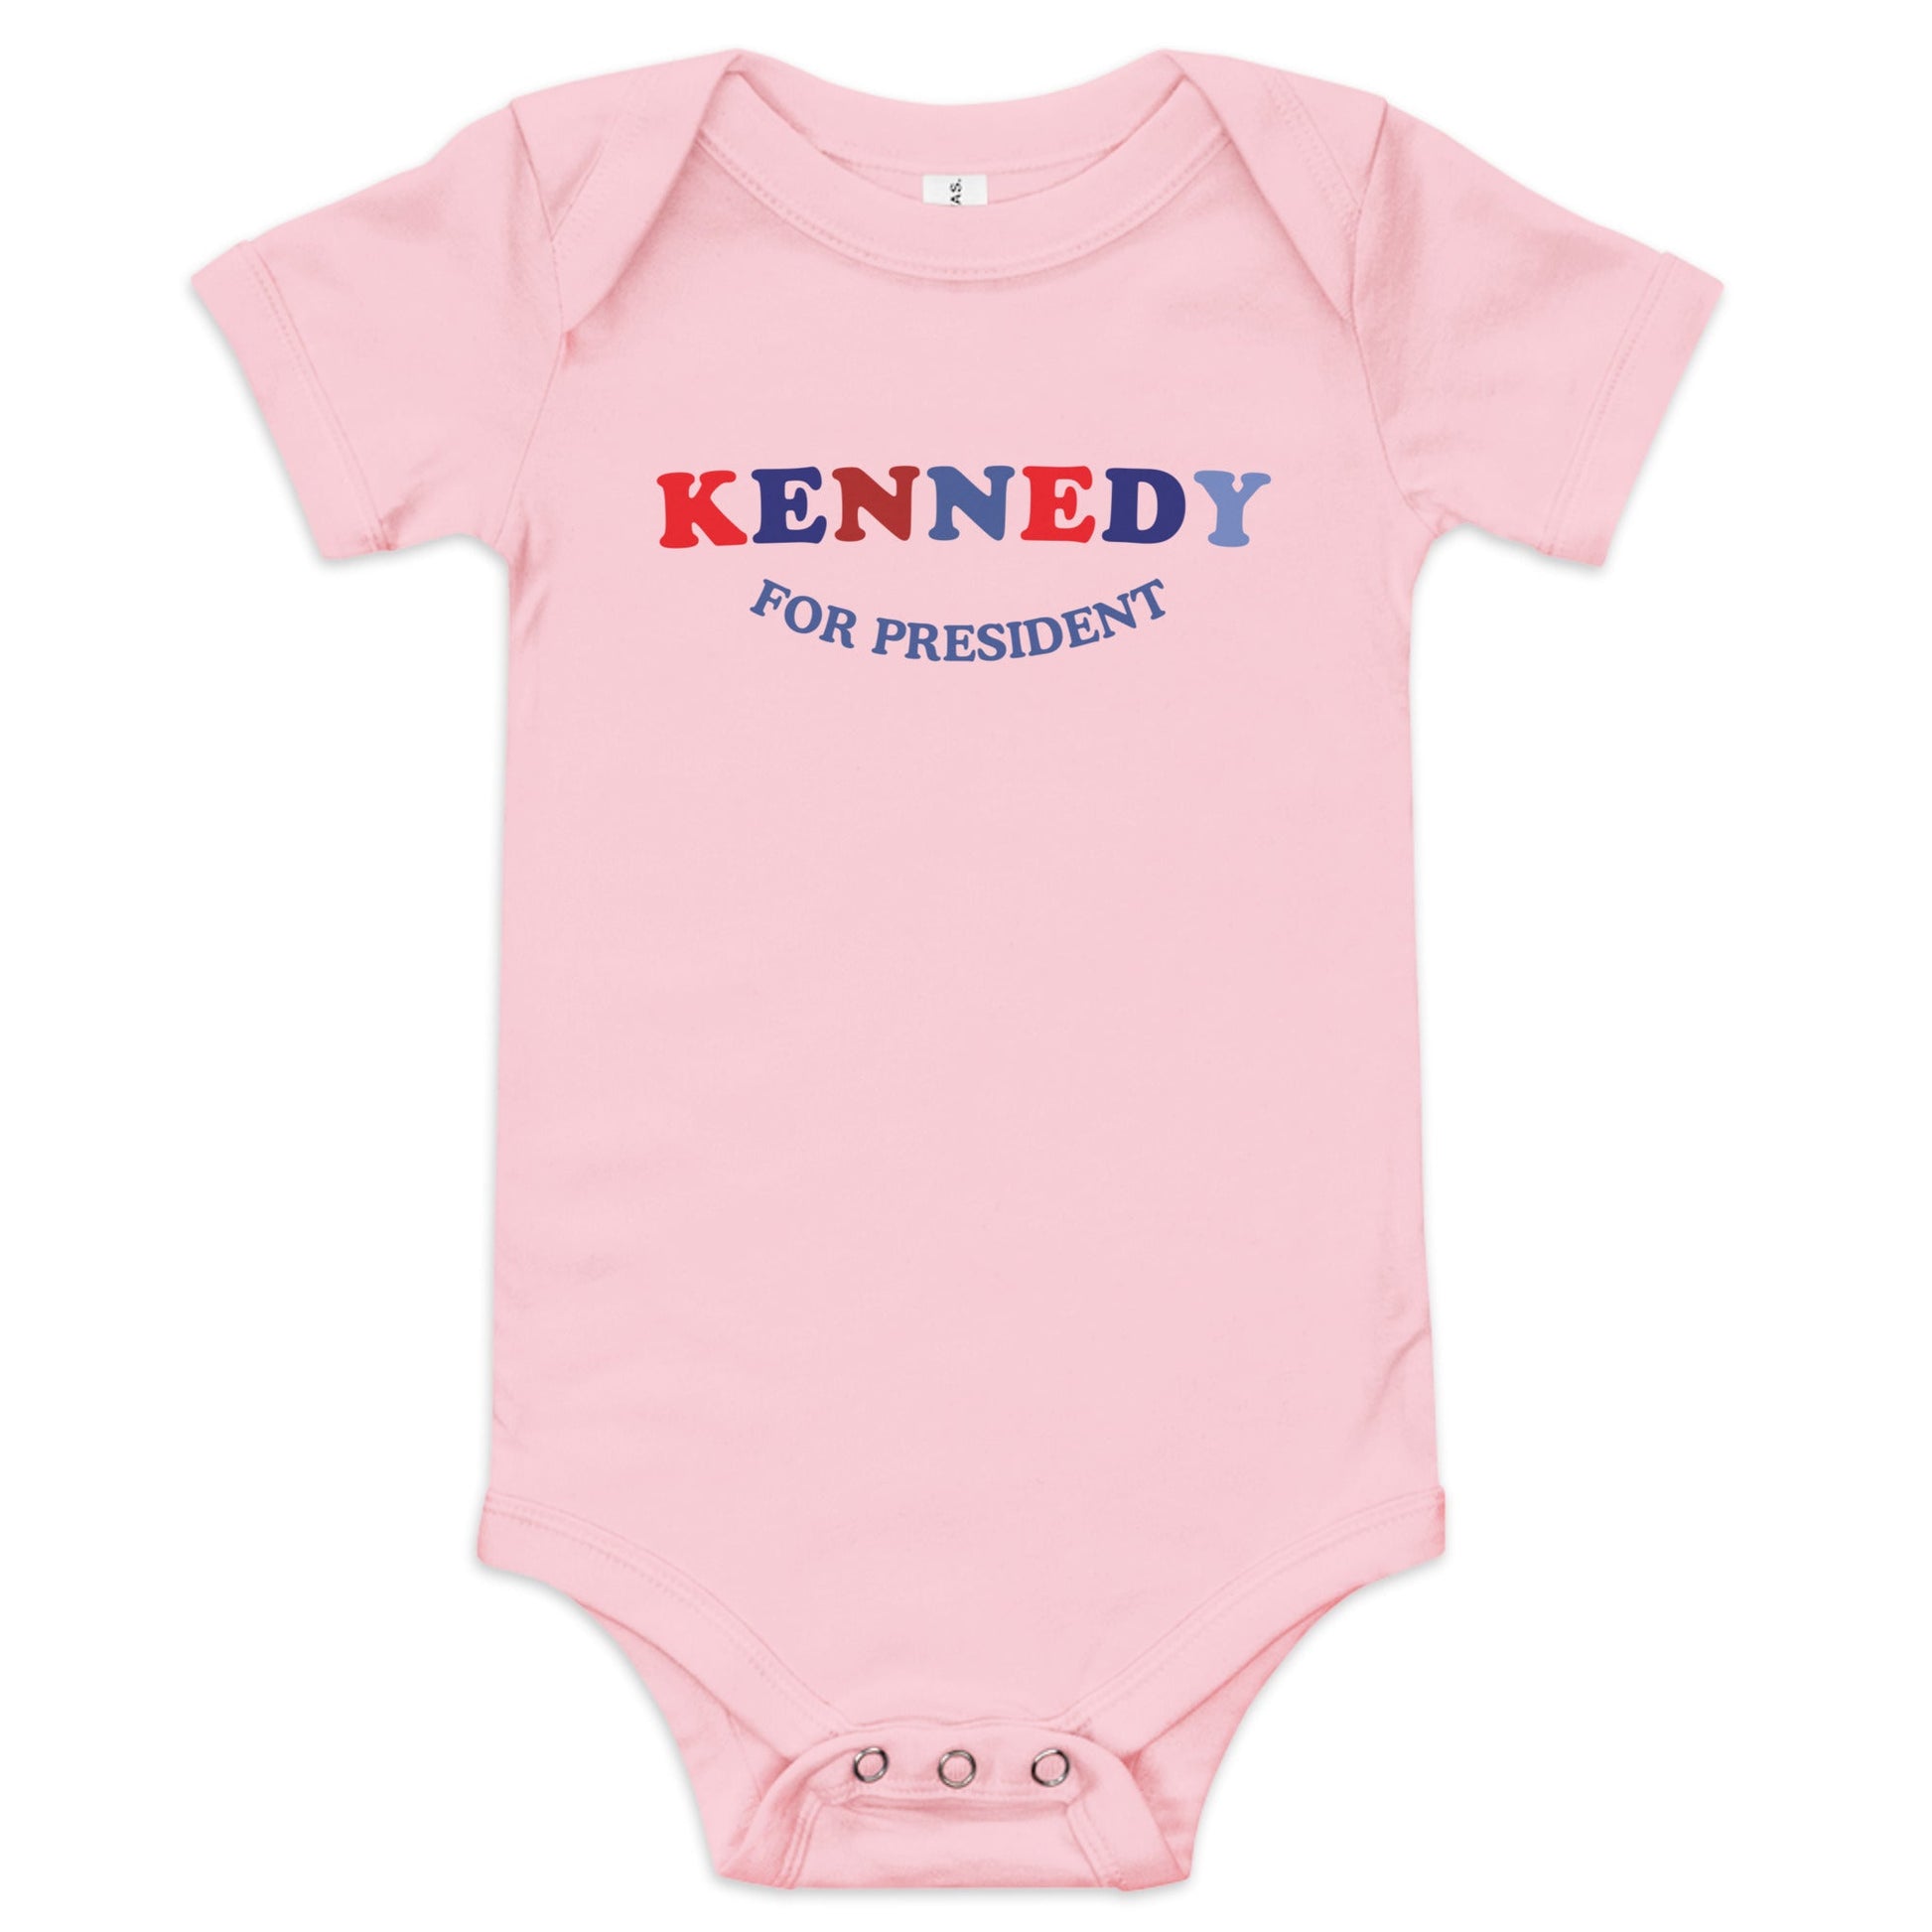 Kennedy for President Baby Onesie - TEAM KENNEDY. All rights reserved